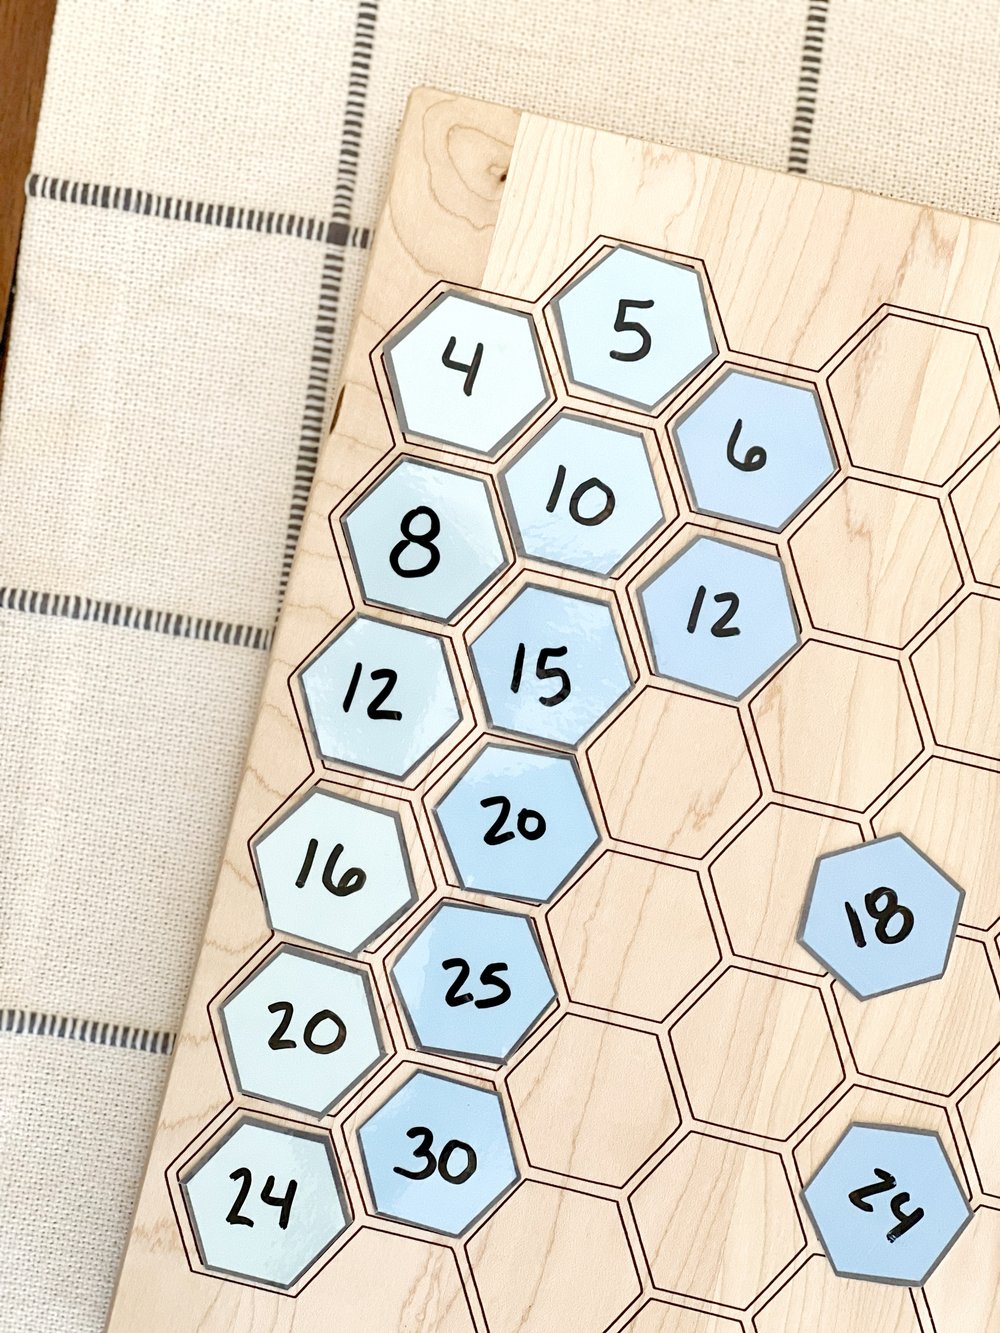 Honeycomb Learning Board Play Guide (FREE)